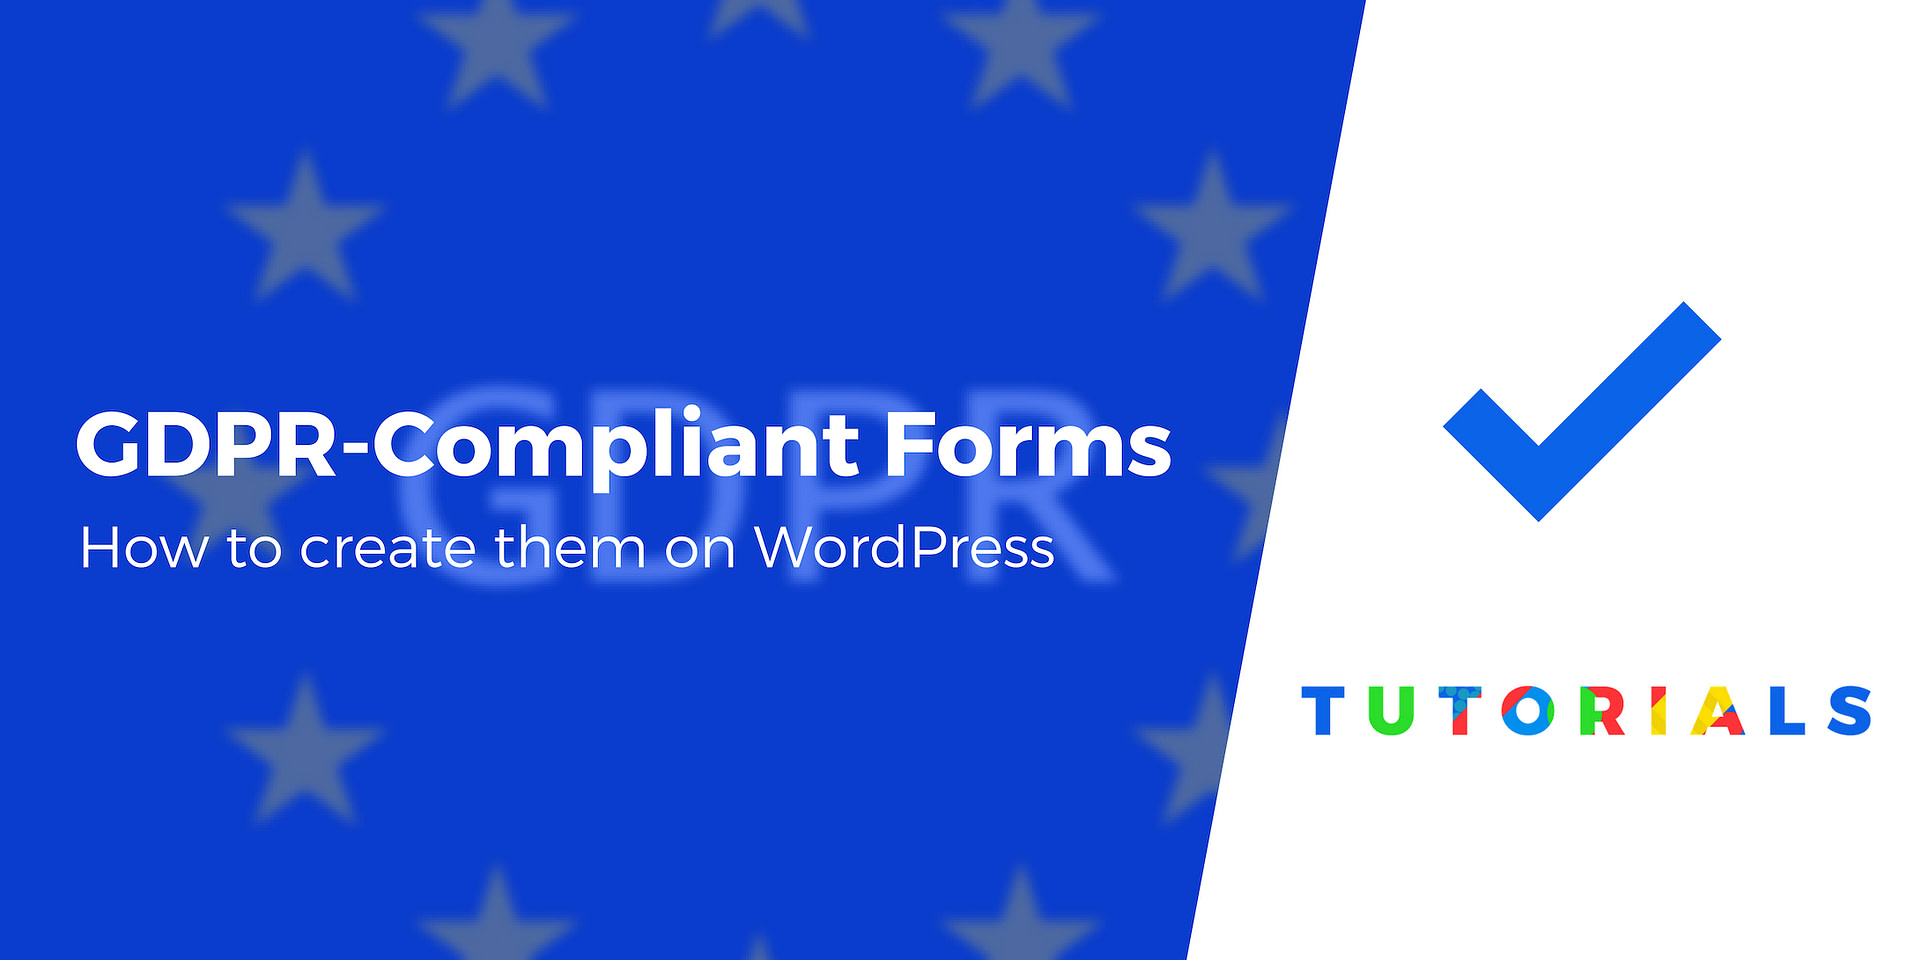 How To Create GDPR Compliant Forms On Your WordPress Site